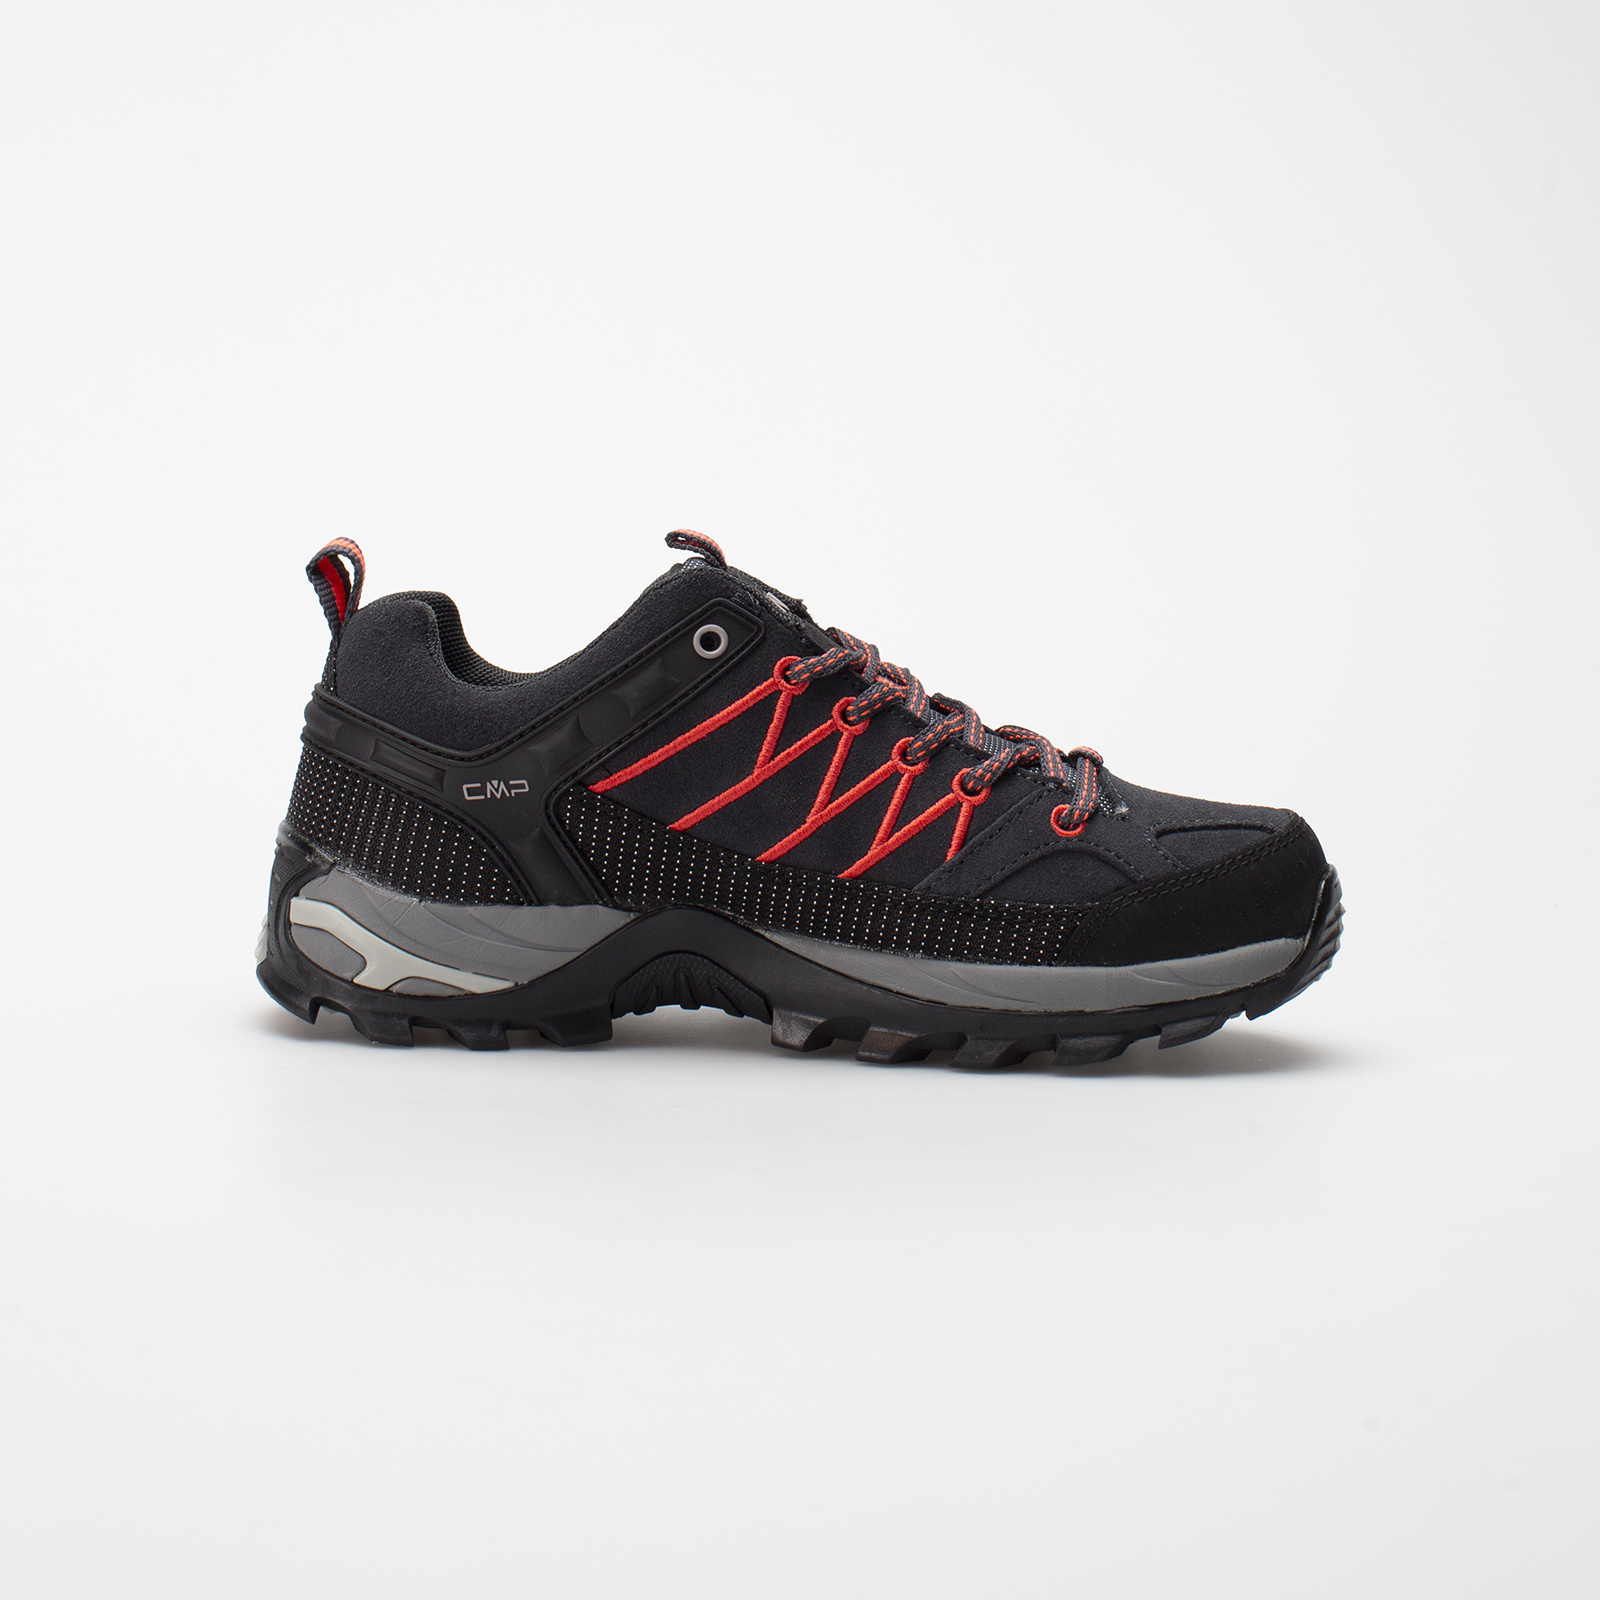 CMP RIGEL LOW WMN TREKKING SHOES WP ANTHRACITE/RED FLUO | Brands \ # ...